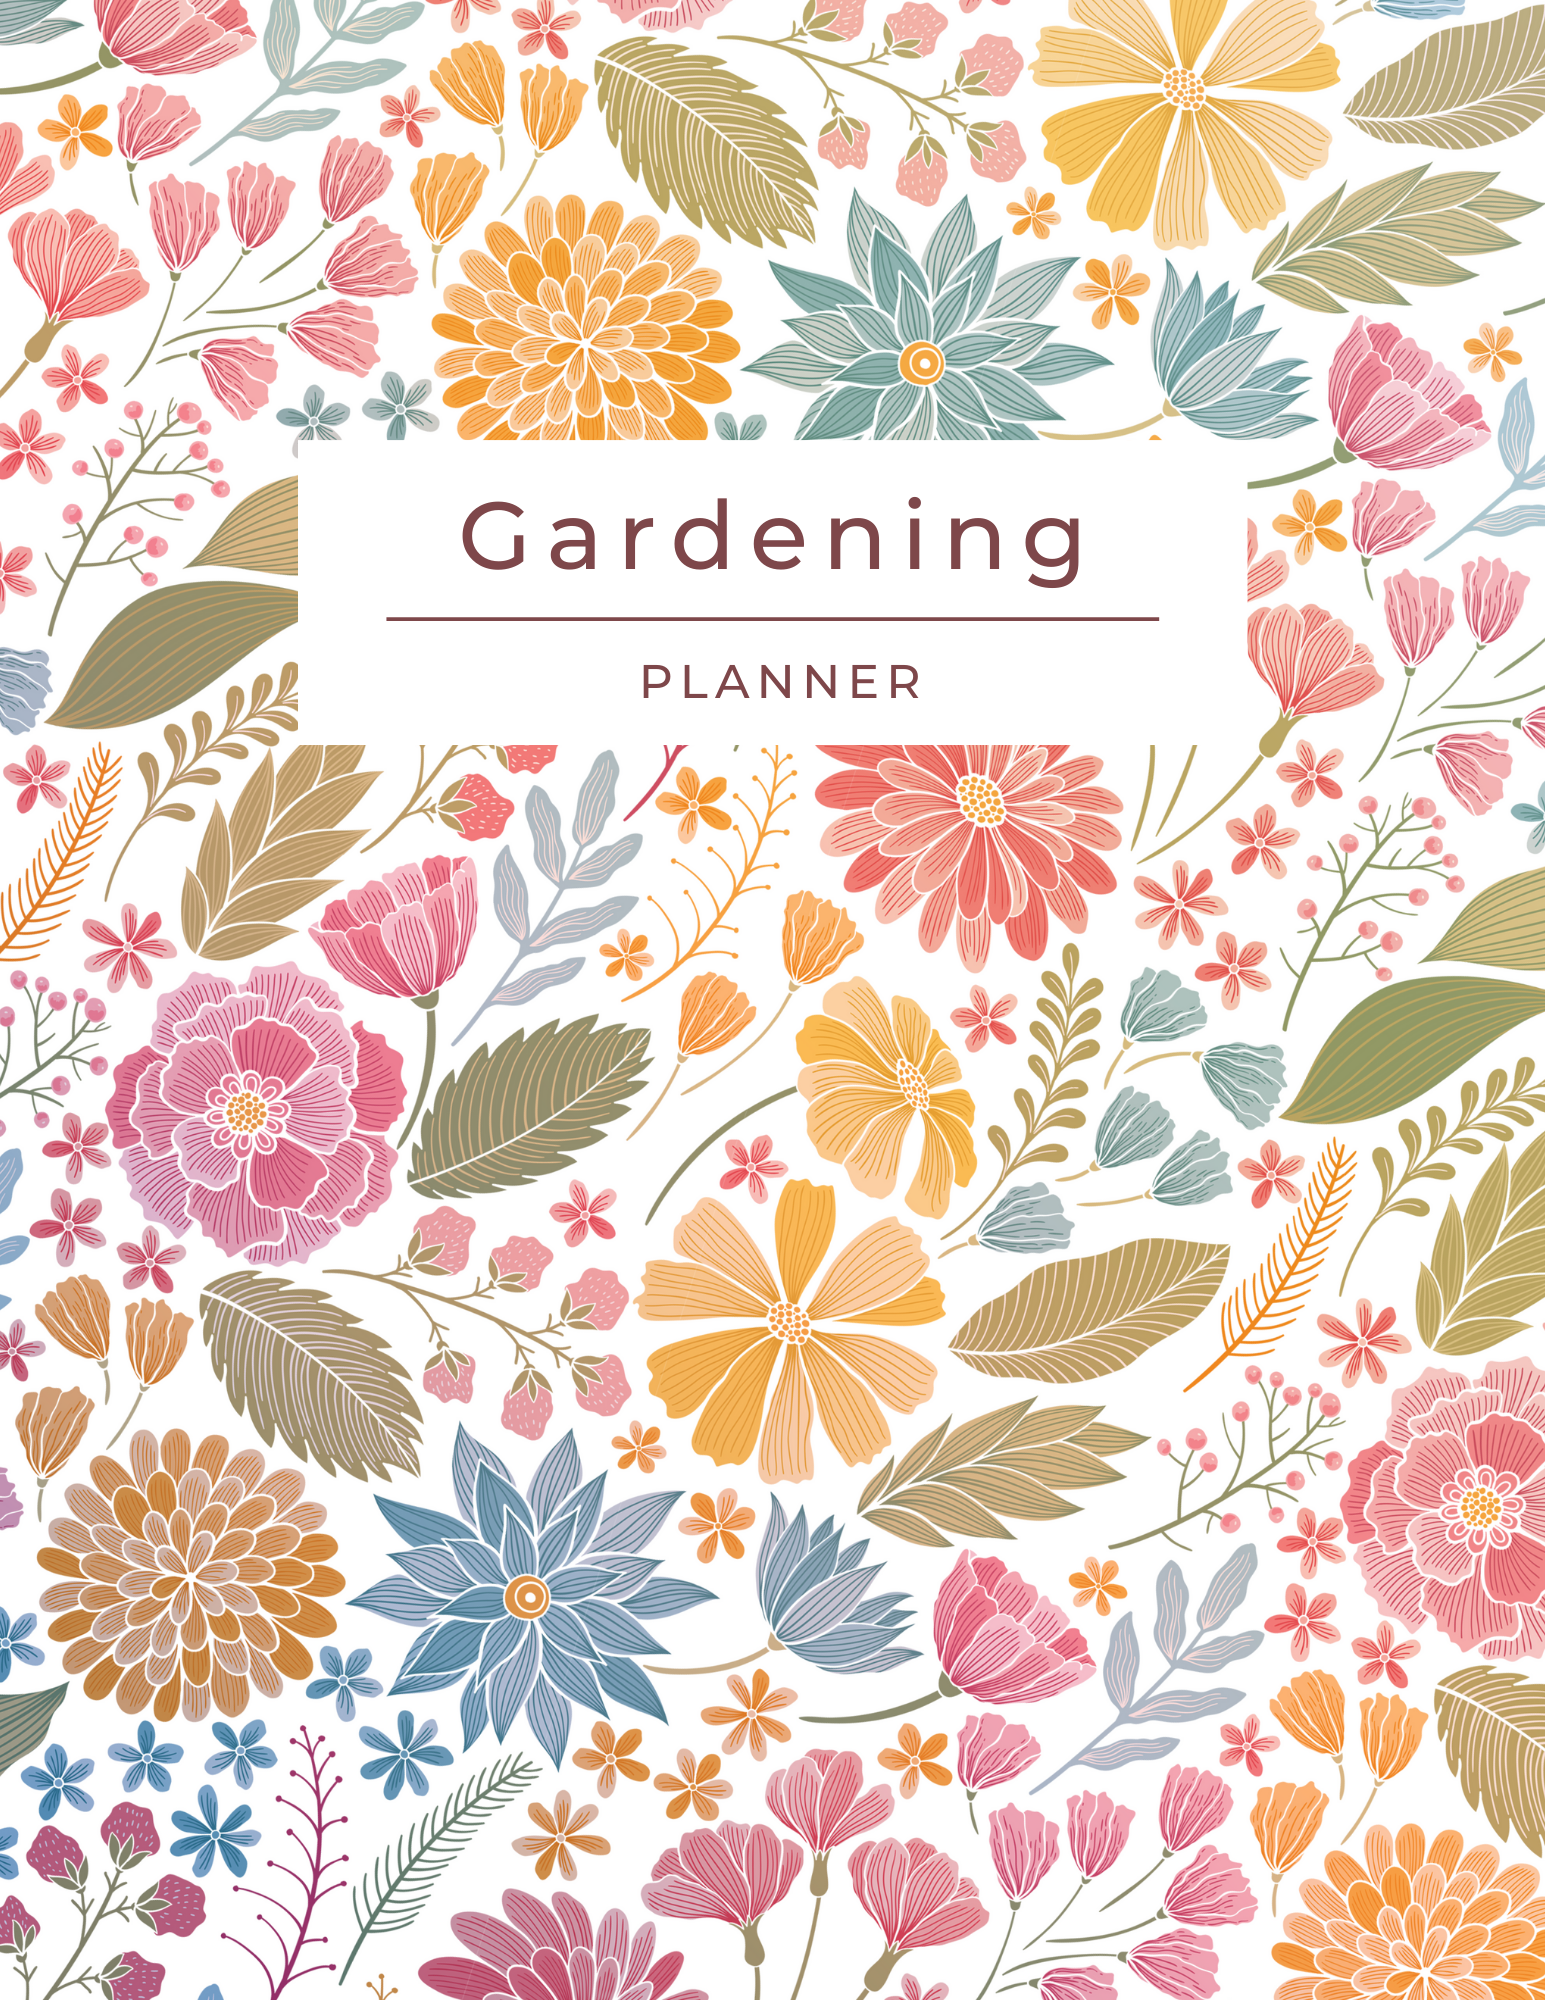 Click To Download Your FREE Garden Planner!